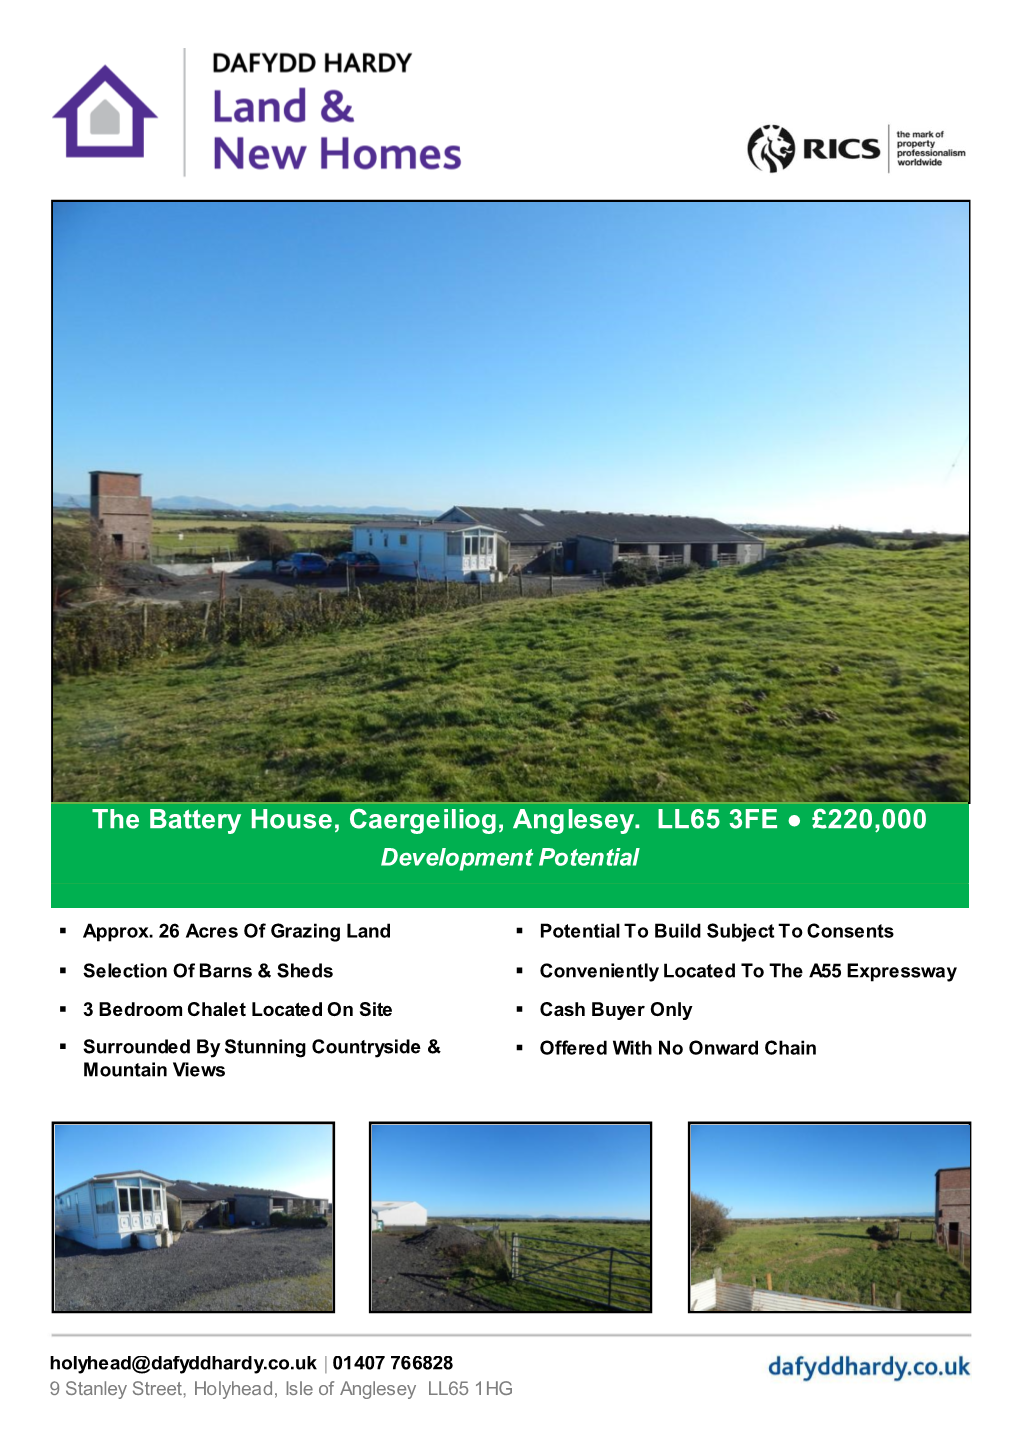 The Battery House, Caergeiliog, Anglesey. LL65 3FE £220,000